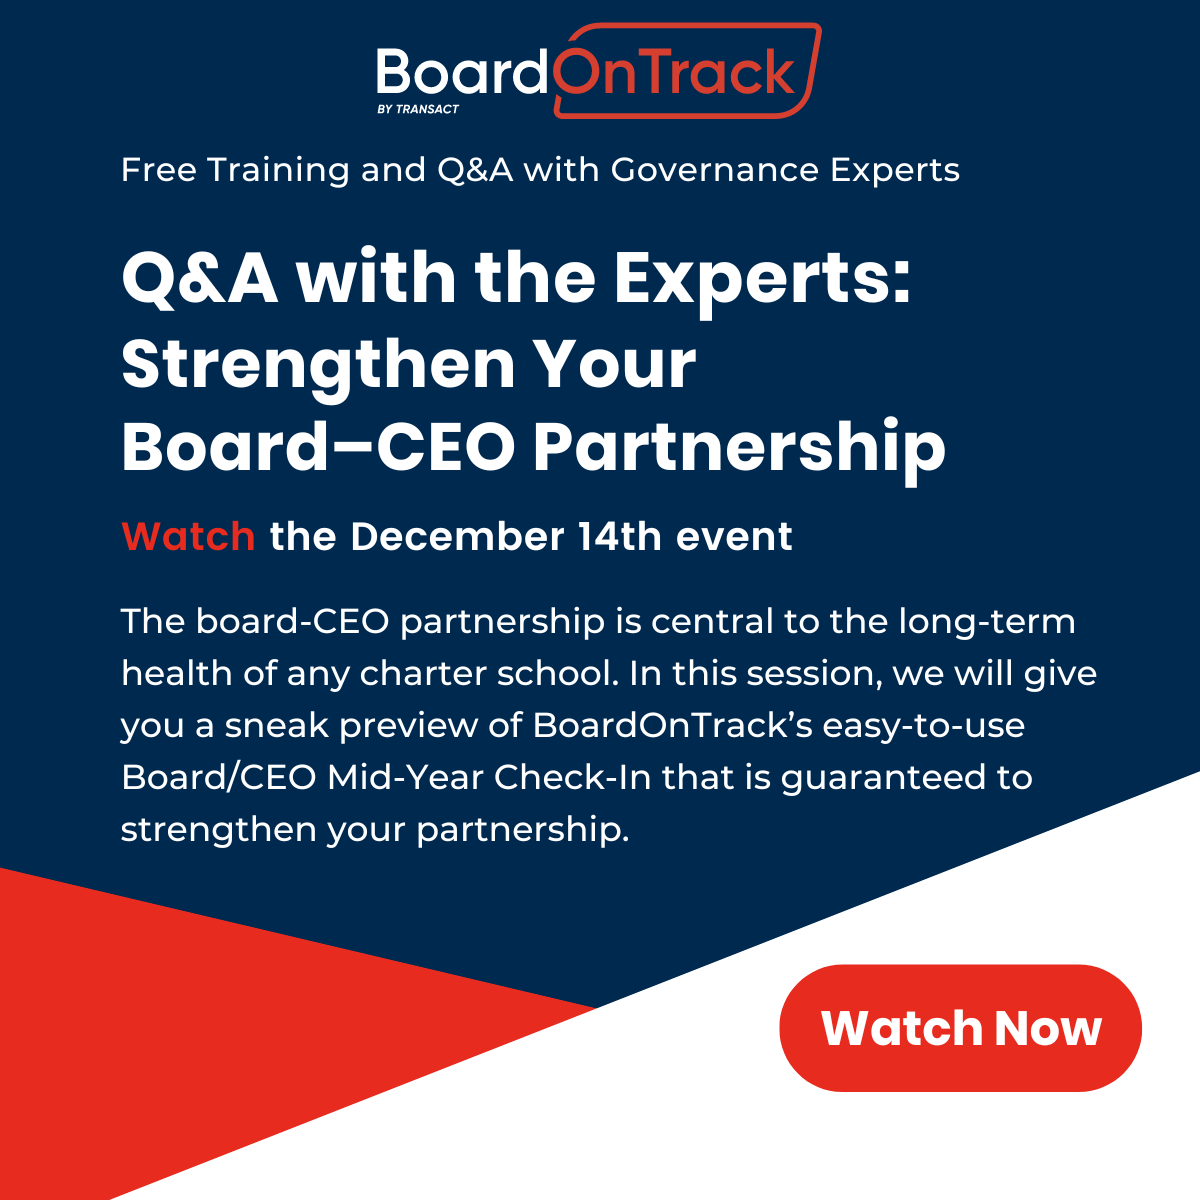 Strengthen Your Board-CEO Partnership